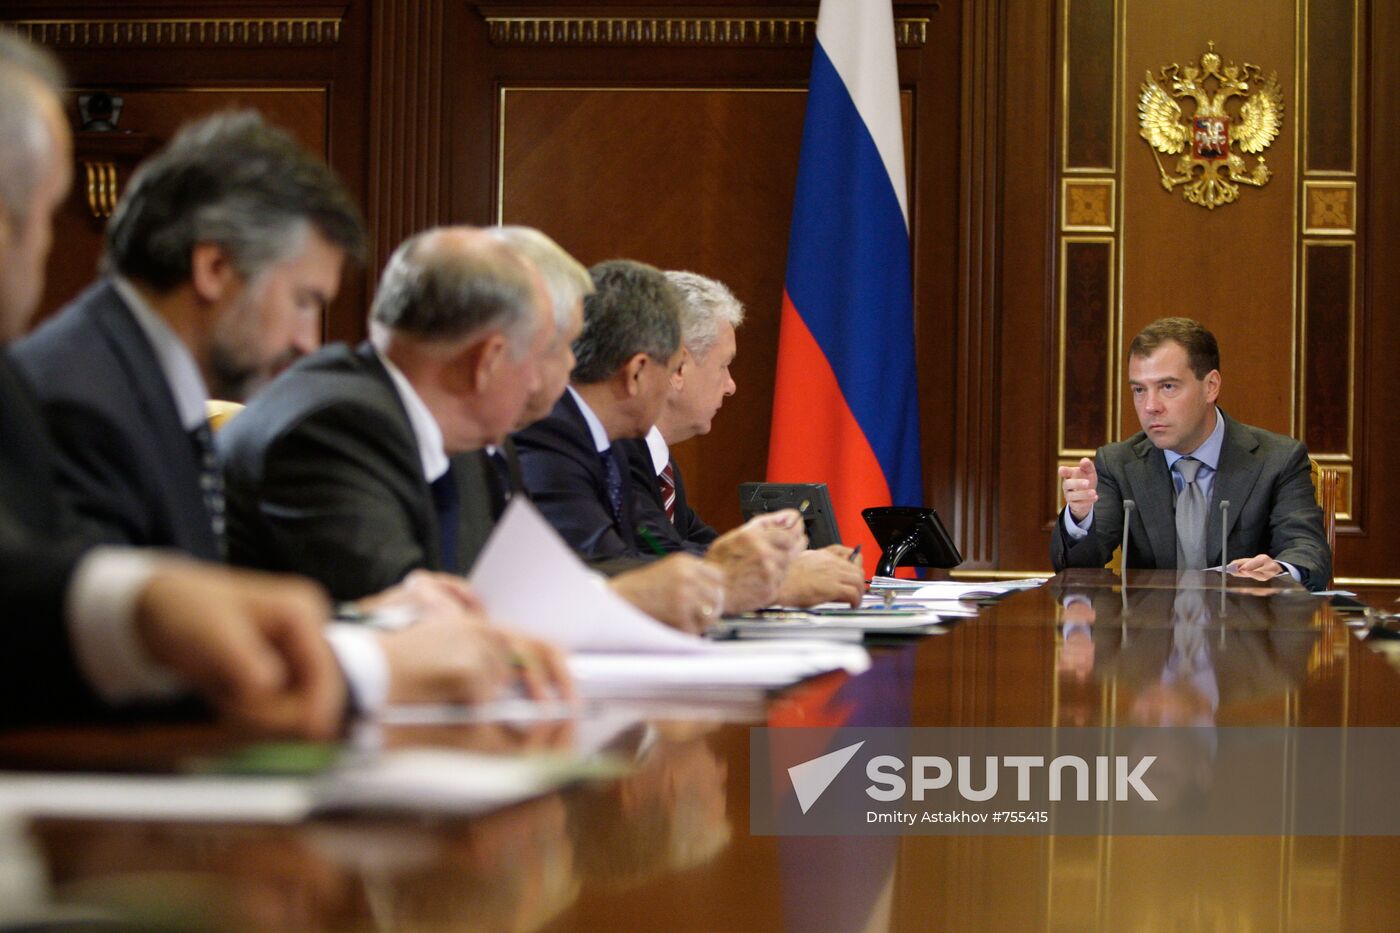 Dmitry Medvedev chairs meeting on forestry